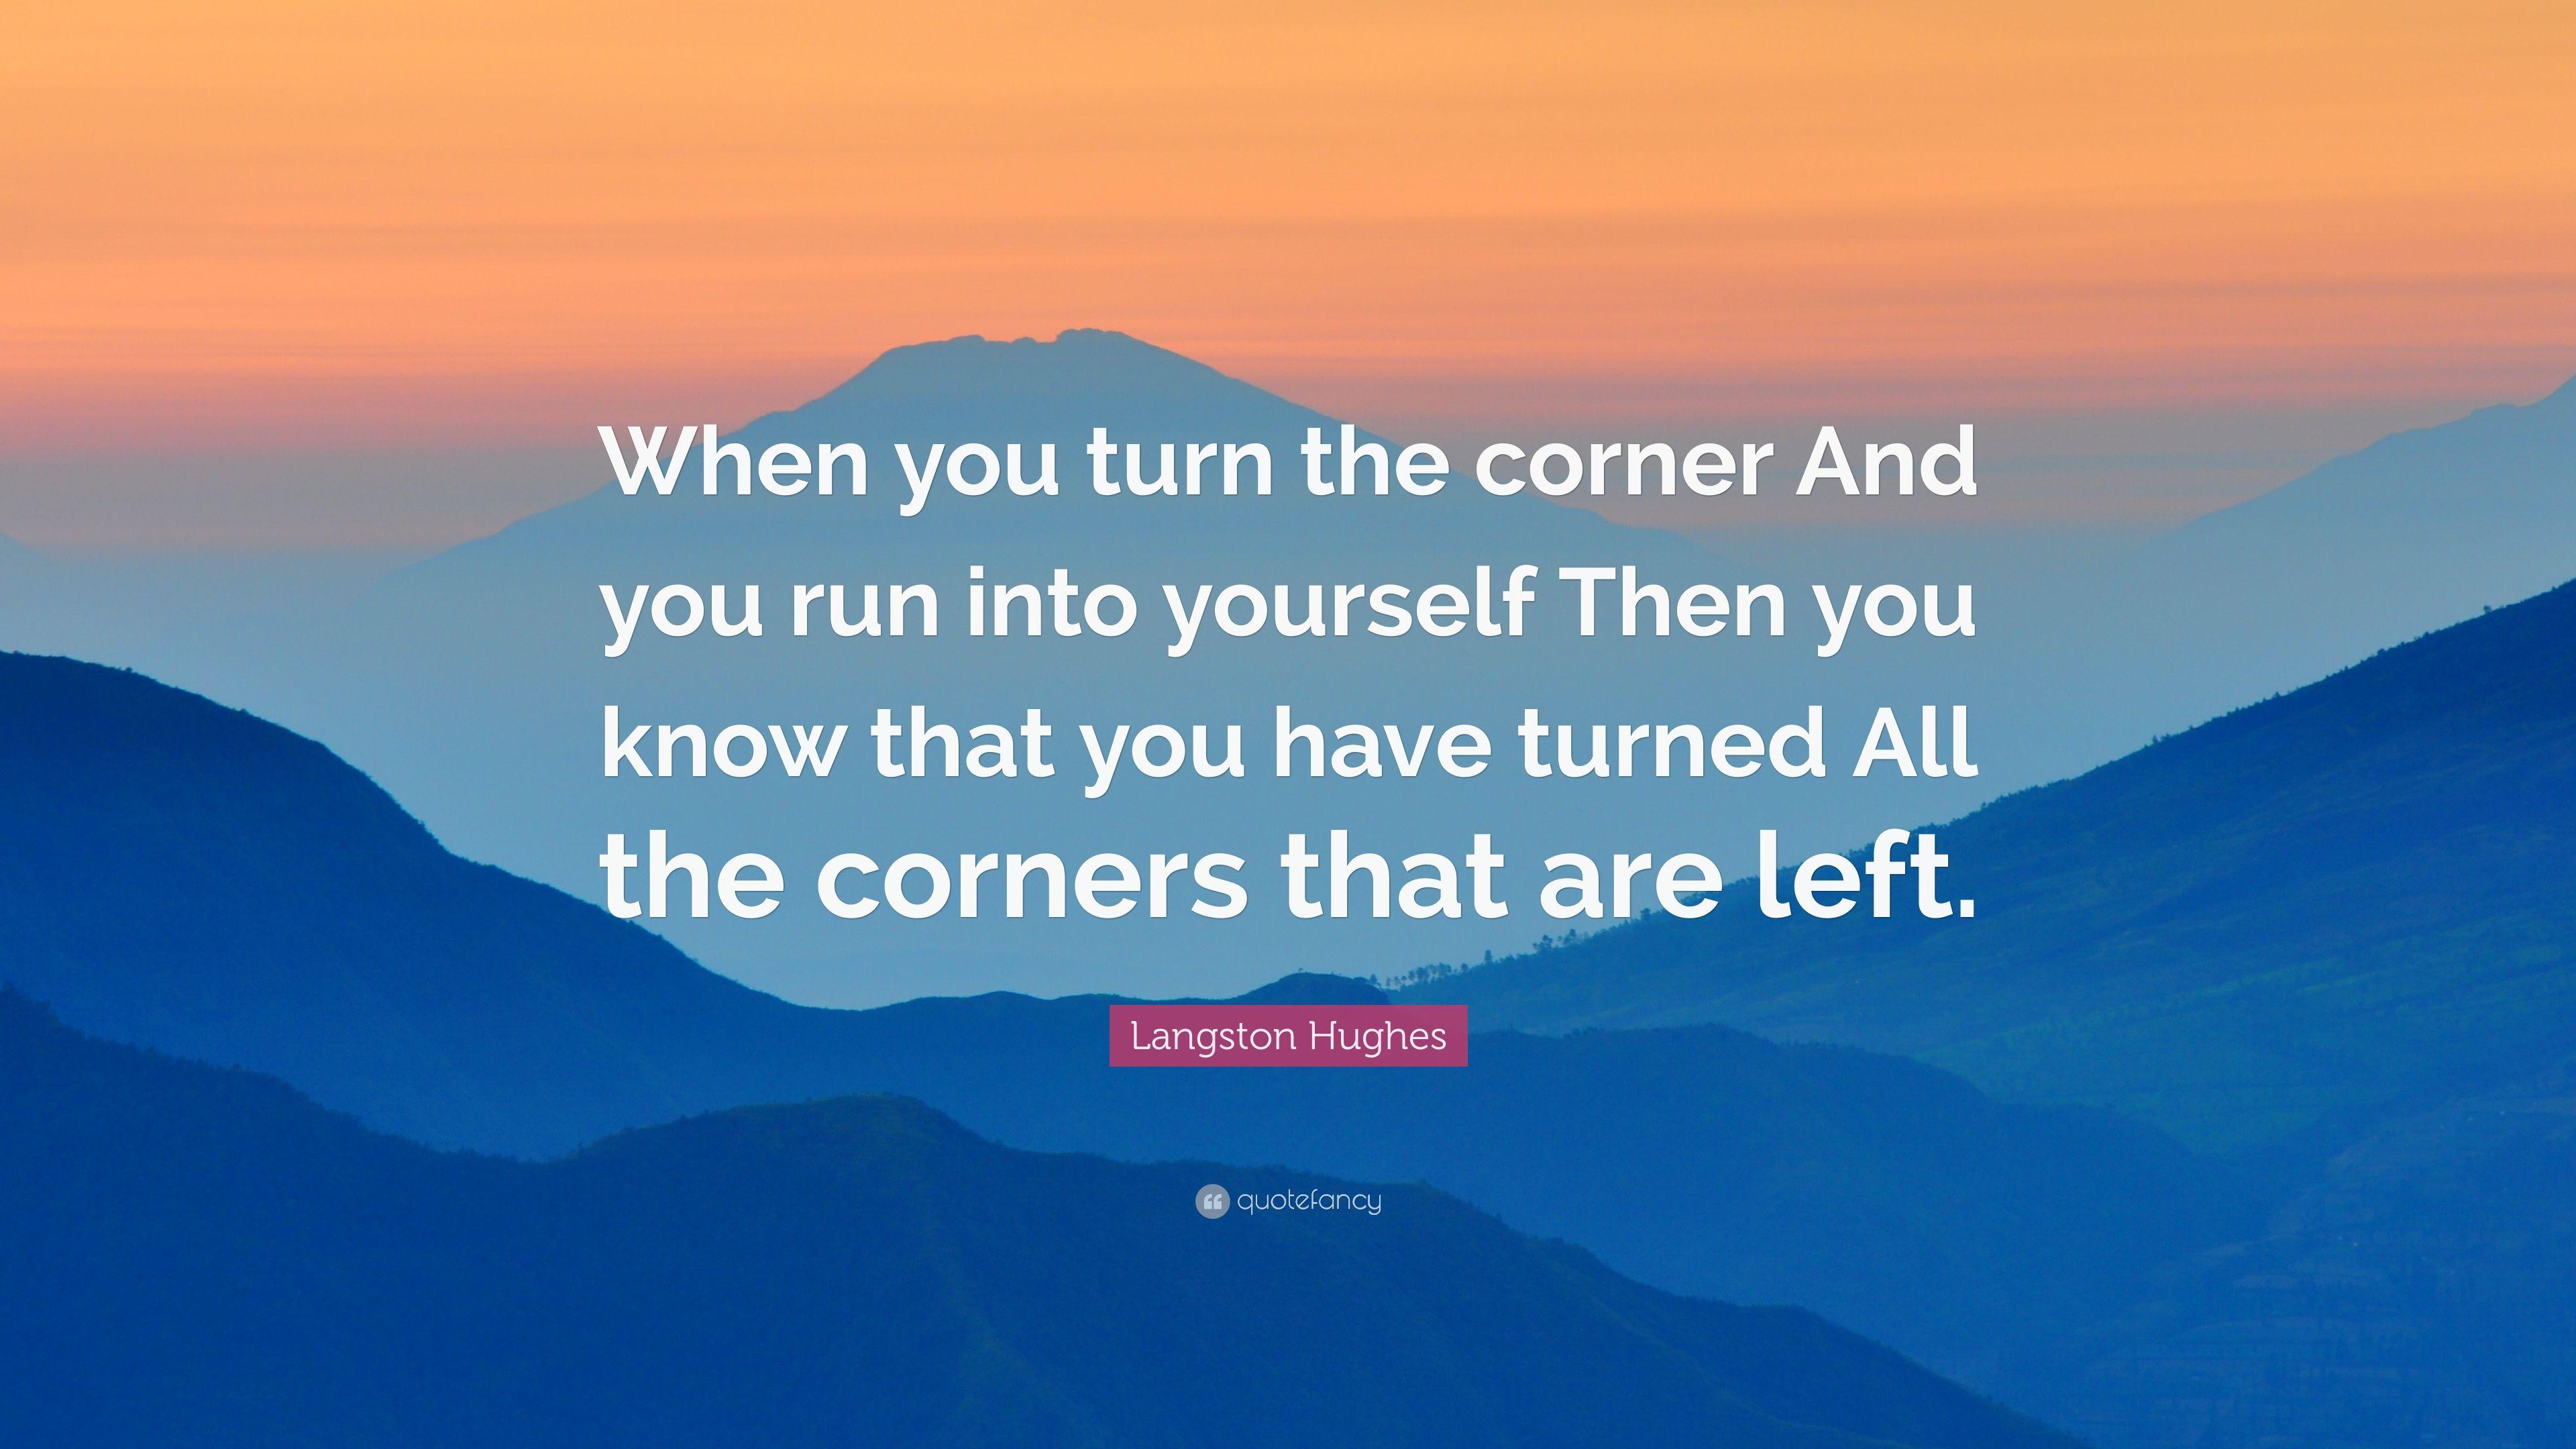 Langston Hughes Quote: “When you turn the corner And you run into